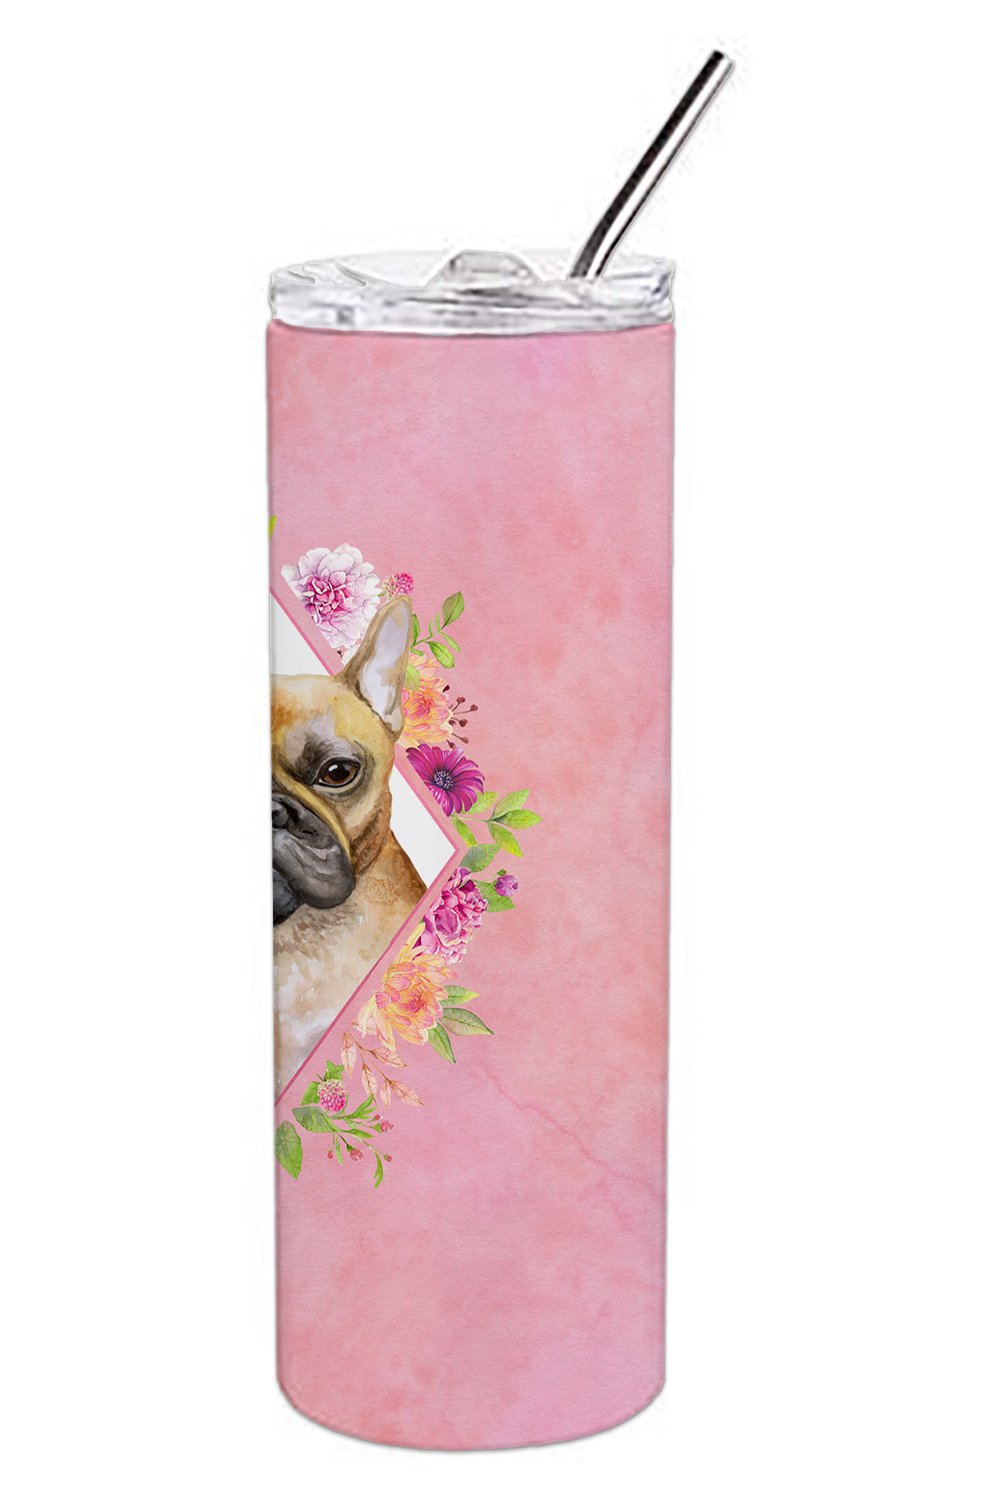 Fawn French Bulldog Pink Flowers Double Walled Stainless Steel 20 oz Skinny Tumbler CK4144TBL20 by Caroline's Treasures